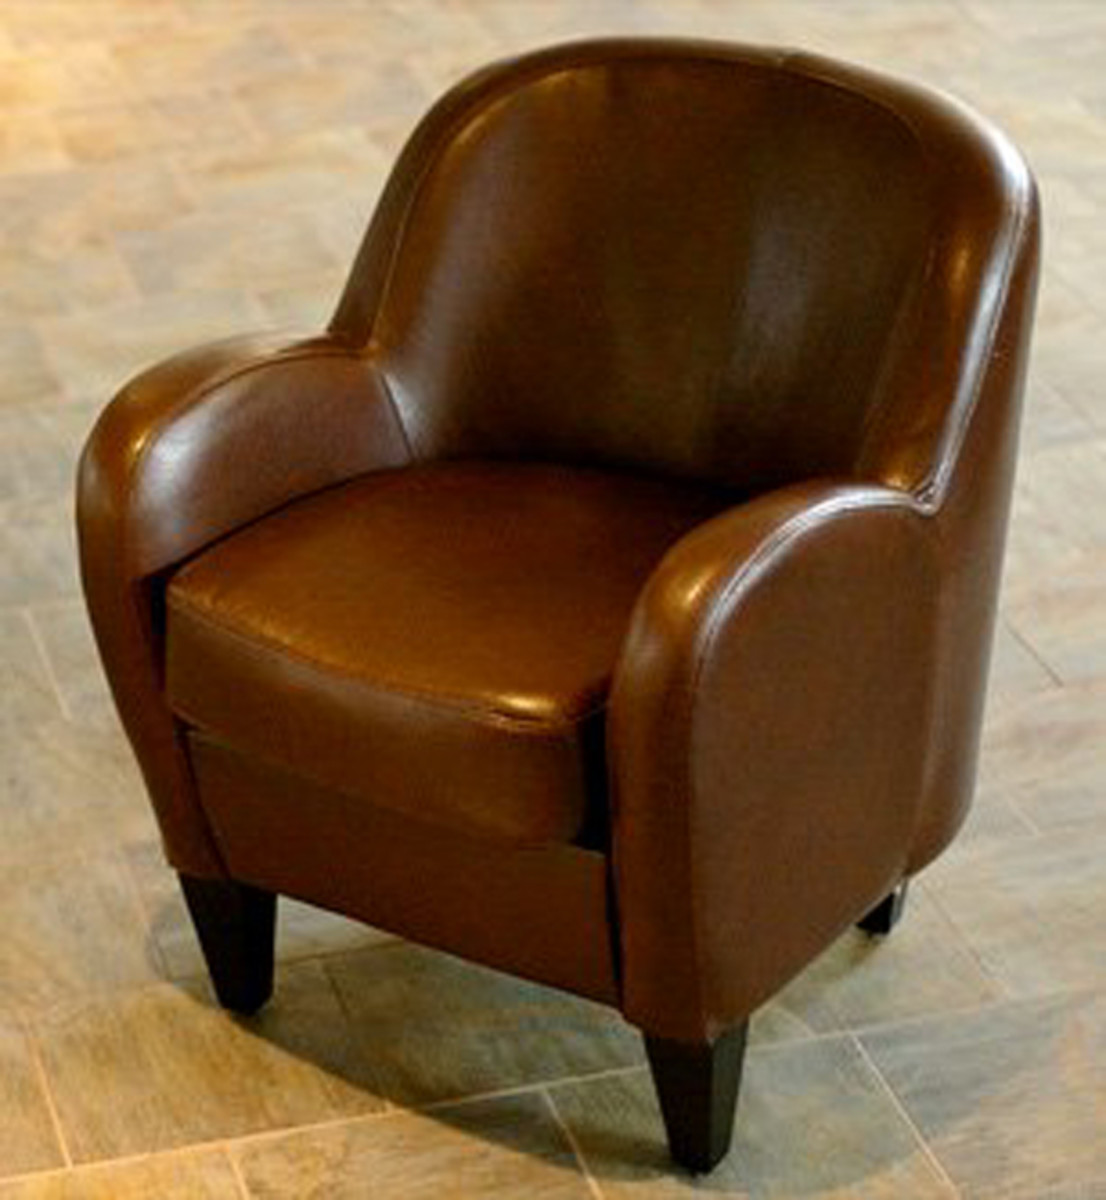 Curved and plump, this chair exemplifies furniture from the art deco era.